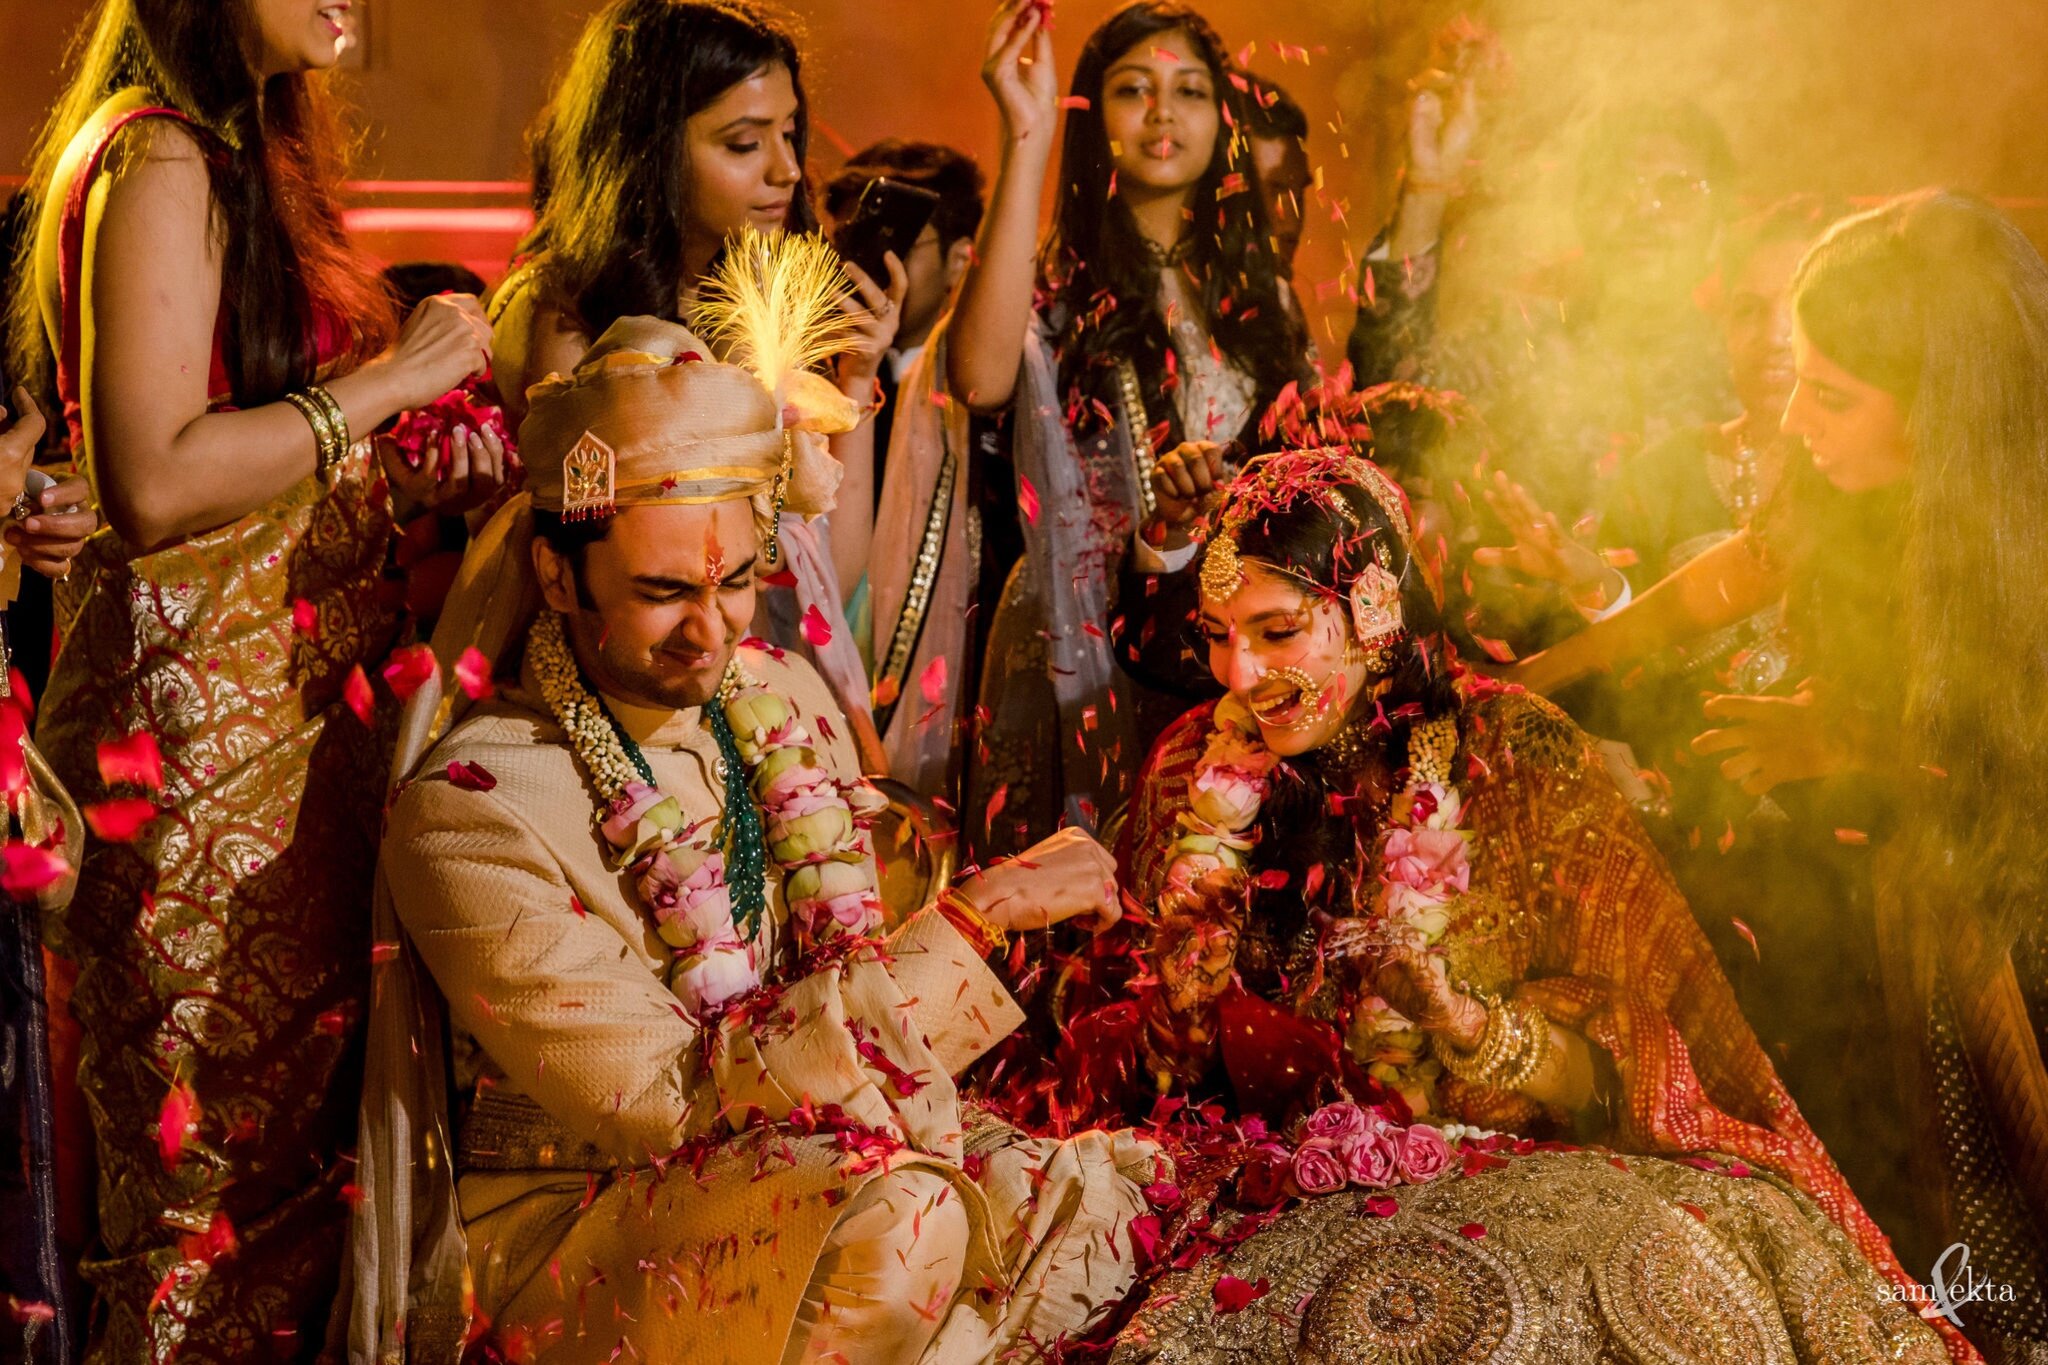 Shivam was clearly surprised with the amount of flowers coming his way from their families, as they completed their wedding vows